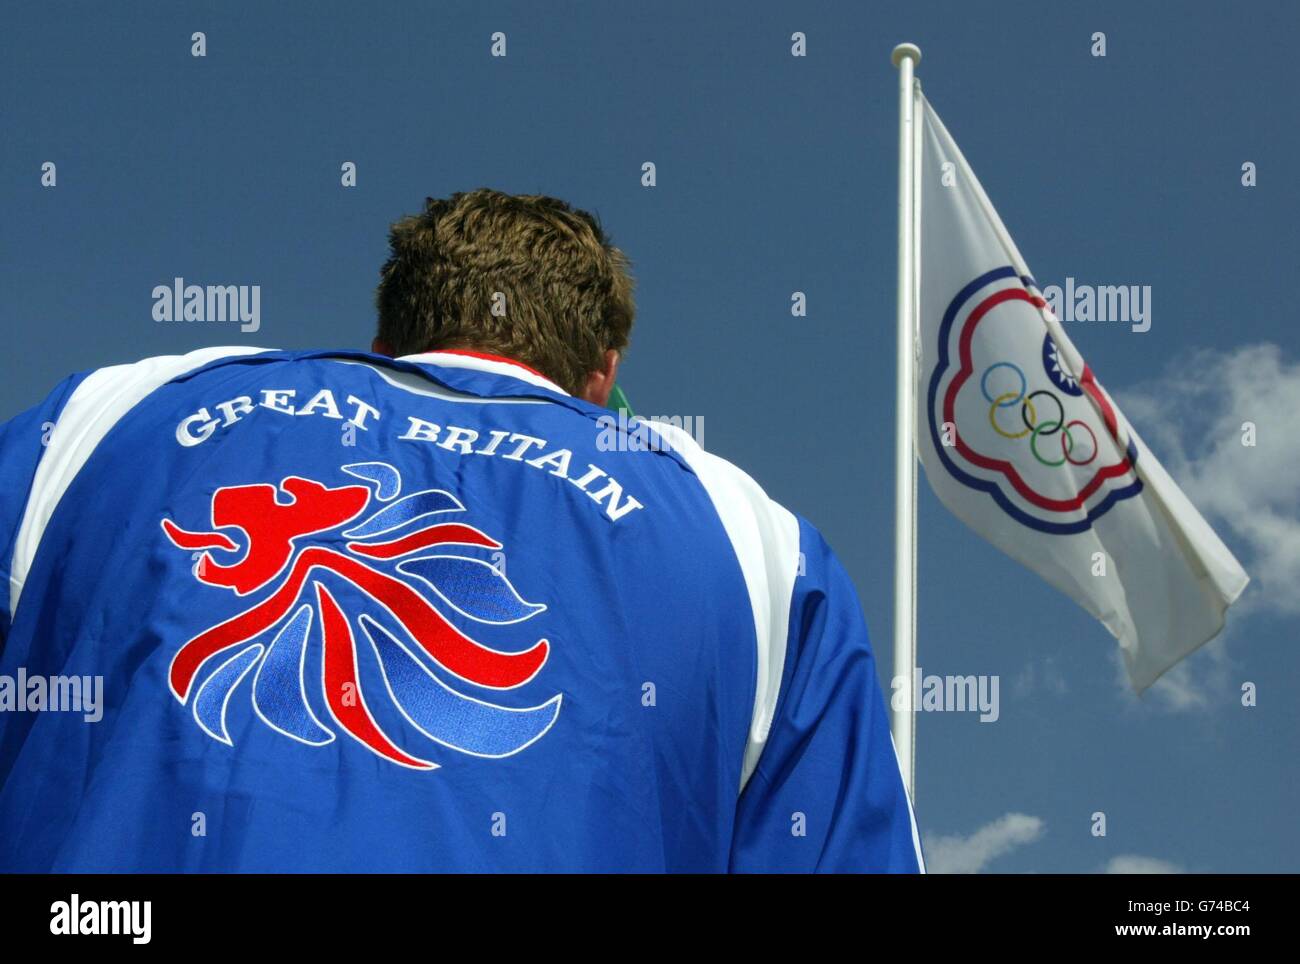 Sailor Iain Percy in the athletes Olympic Village in Athens, Greece. Many of the British athletes are still at training camps in Cyprus and Barcelona but will begin to arrive before Friday's opening ceremony. Stock Photo